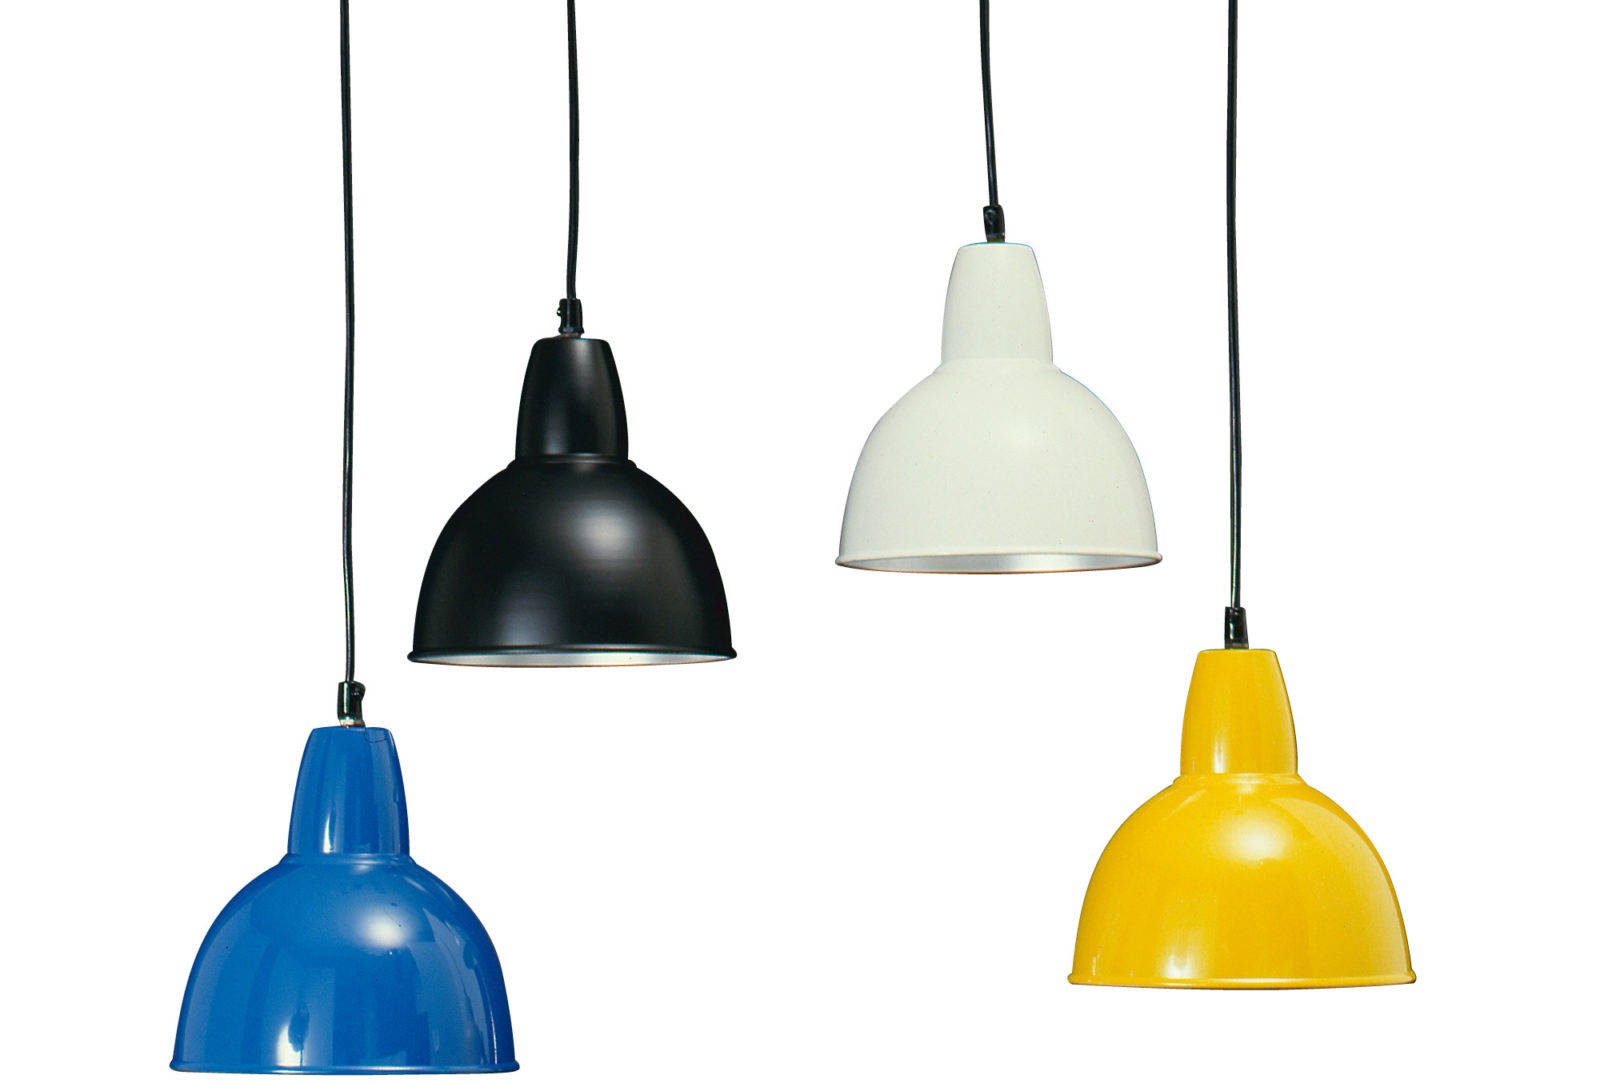 Four aluminium ceiling lamps in different colours, shape inspired by the lighting in photography studios, FOTO.